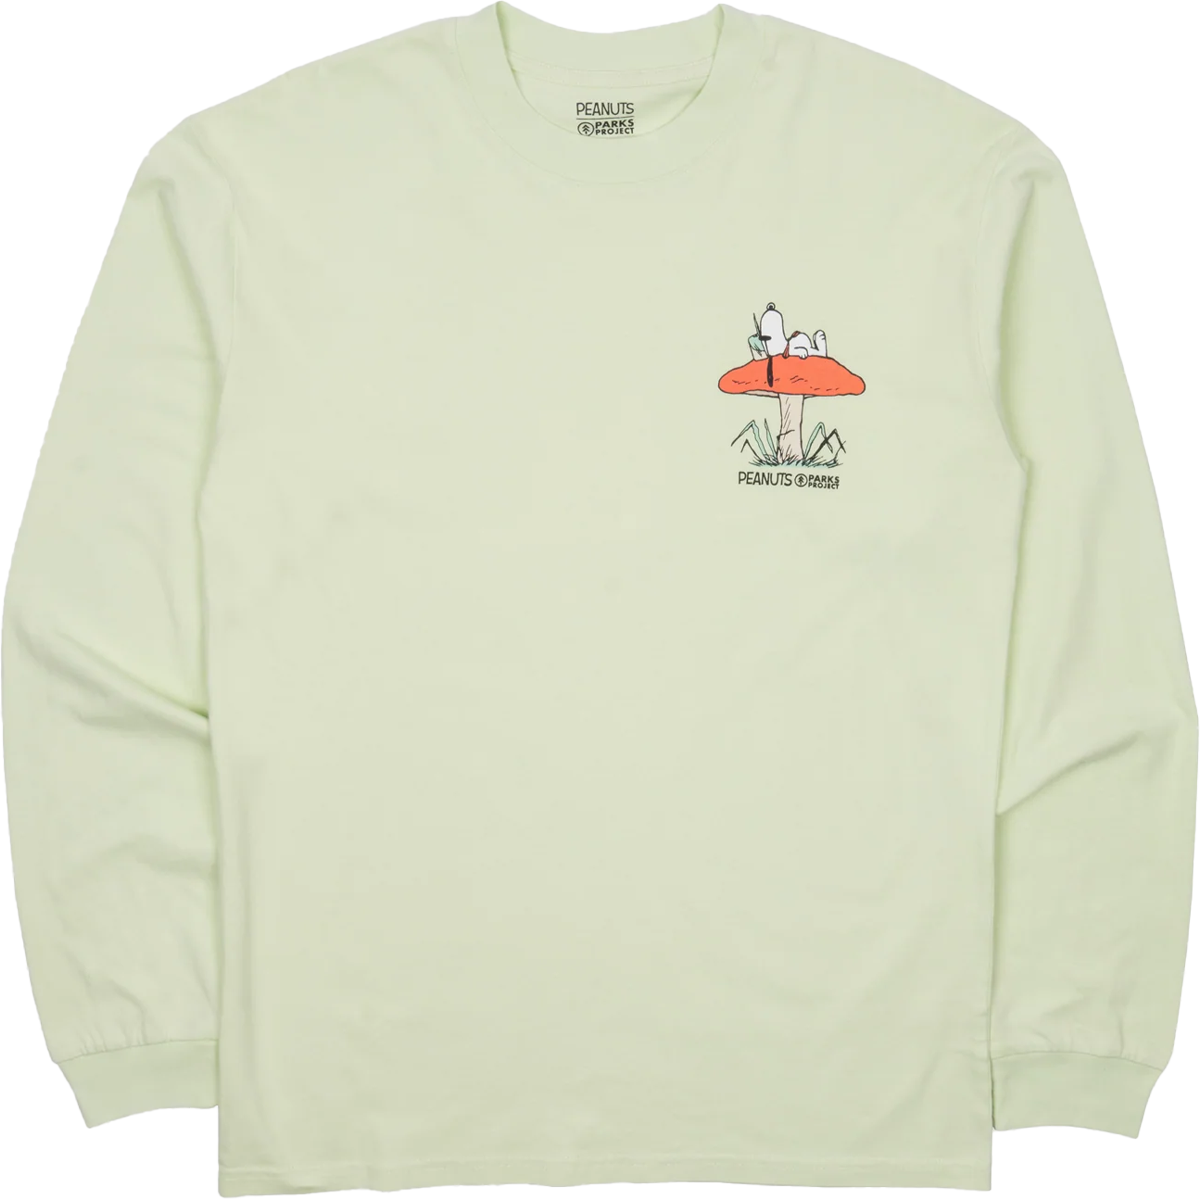 Peanuts X Parks Project Escape to Nature Long Sleeve alternate view